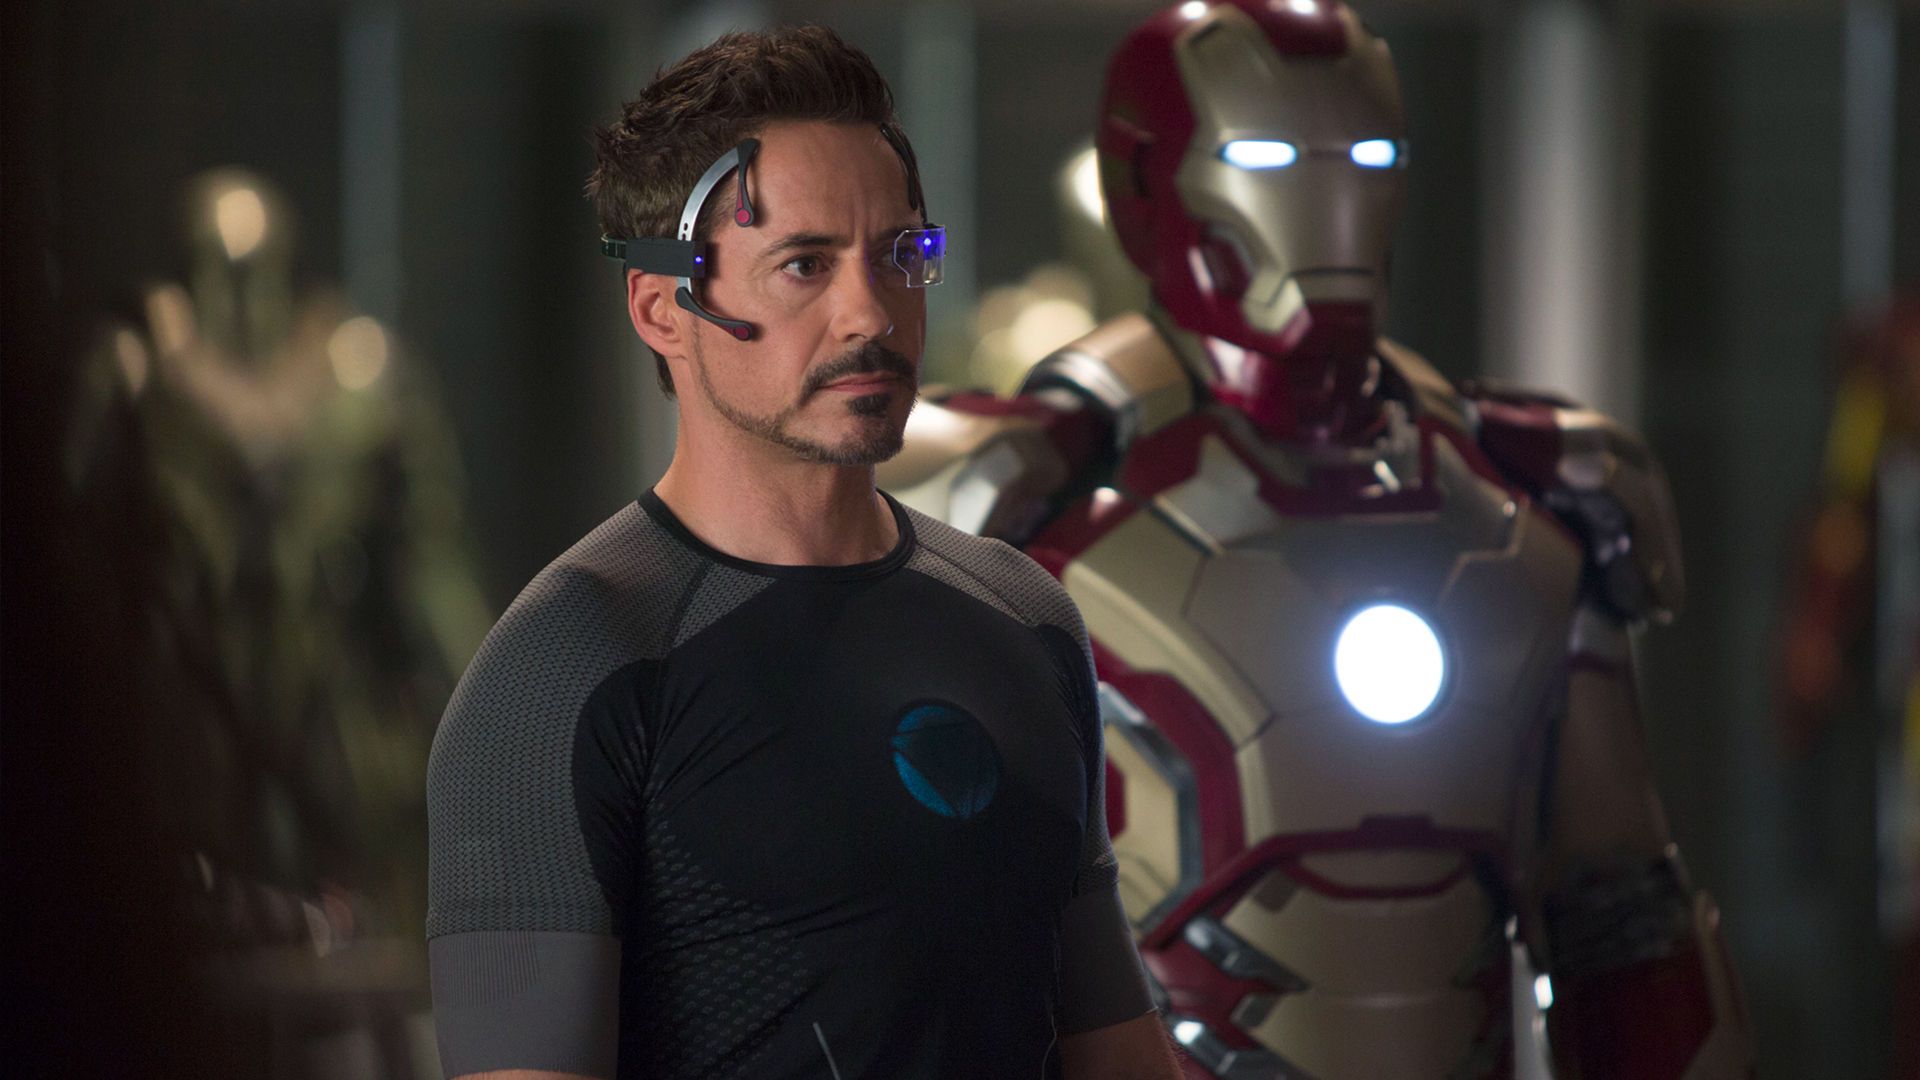 Robert Downey Jr. in Iron Man 3 with Armor Suits